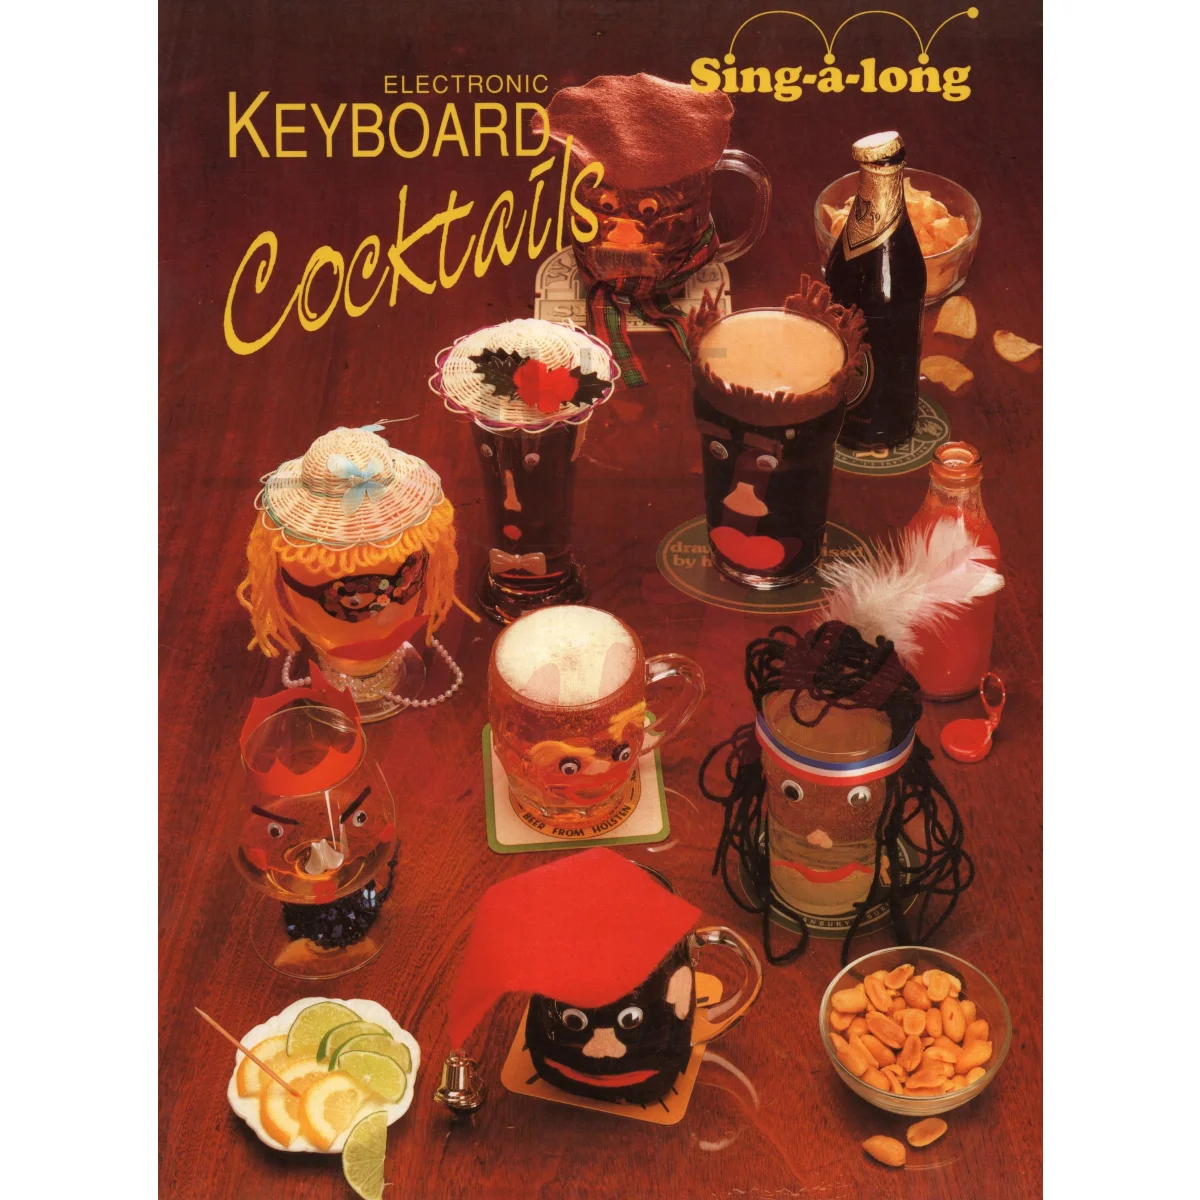 Keyboard Cocktails: Sing-a-Long